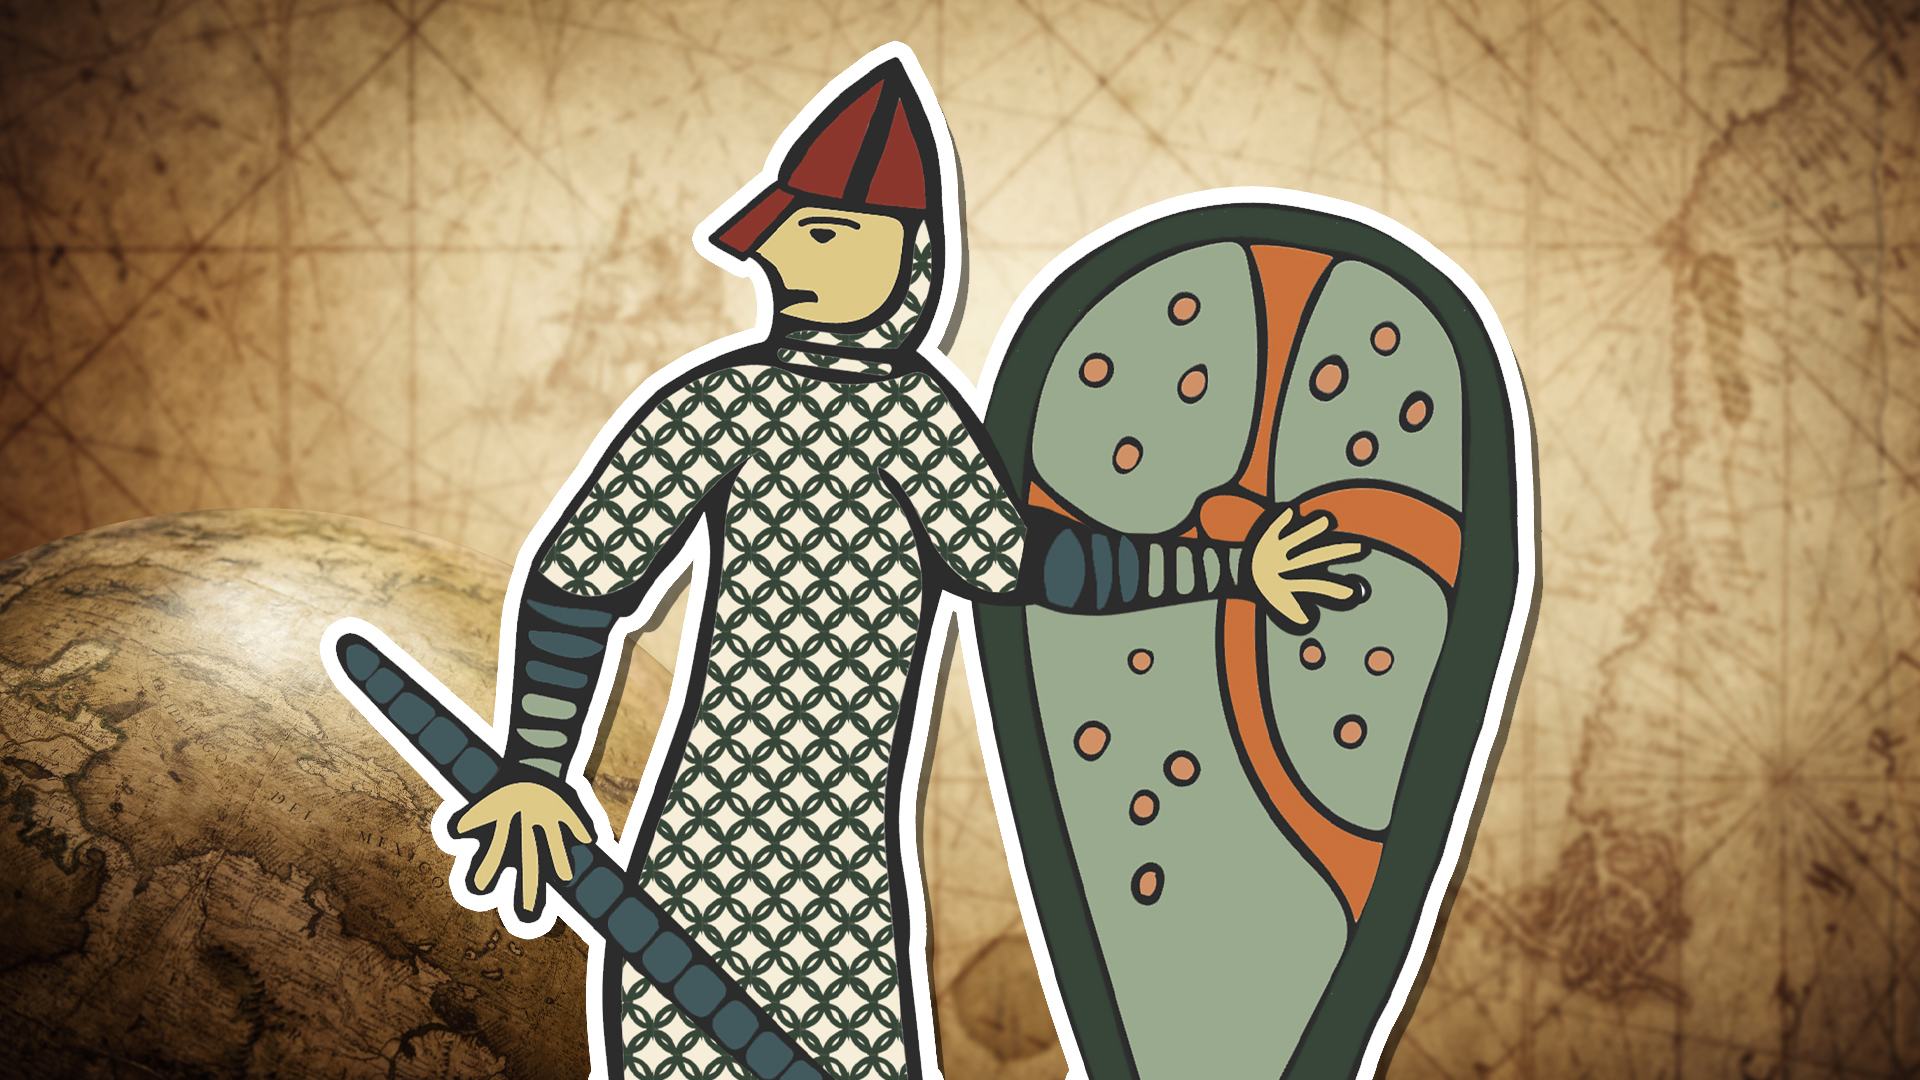 An illustration of a soldier during the Battle of Hastings